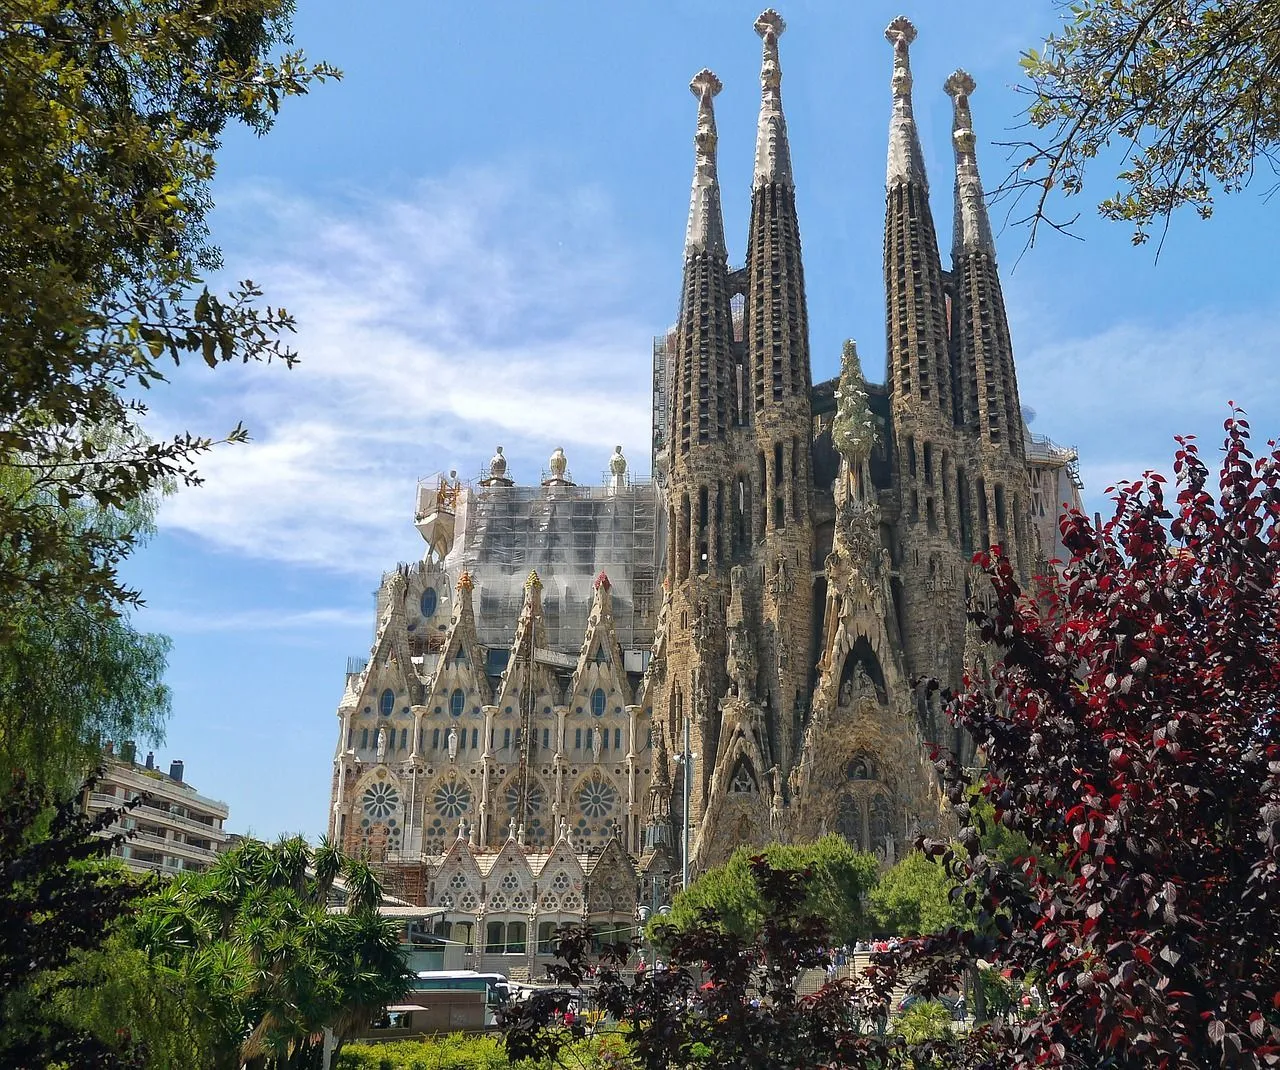 The Sagrada Familia Cathedral in Barcelona attracts the highest number of tourists in Spain.